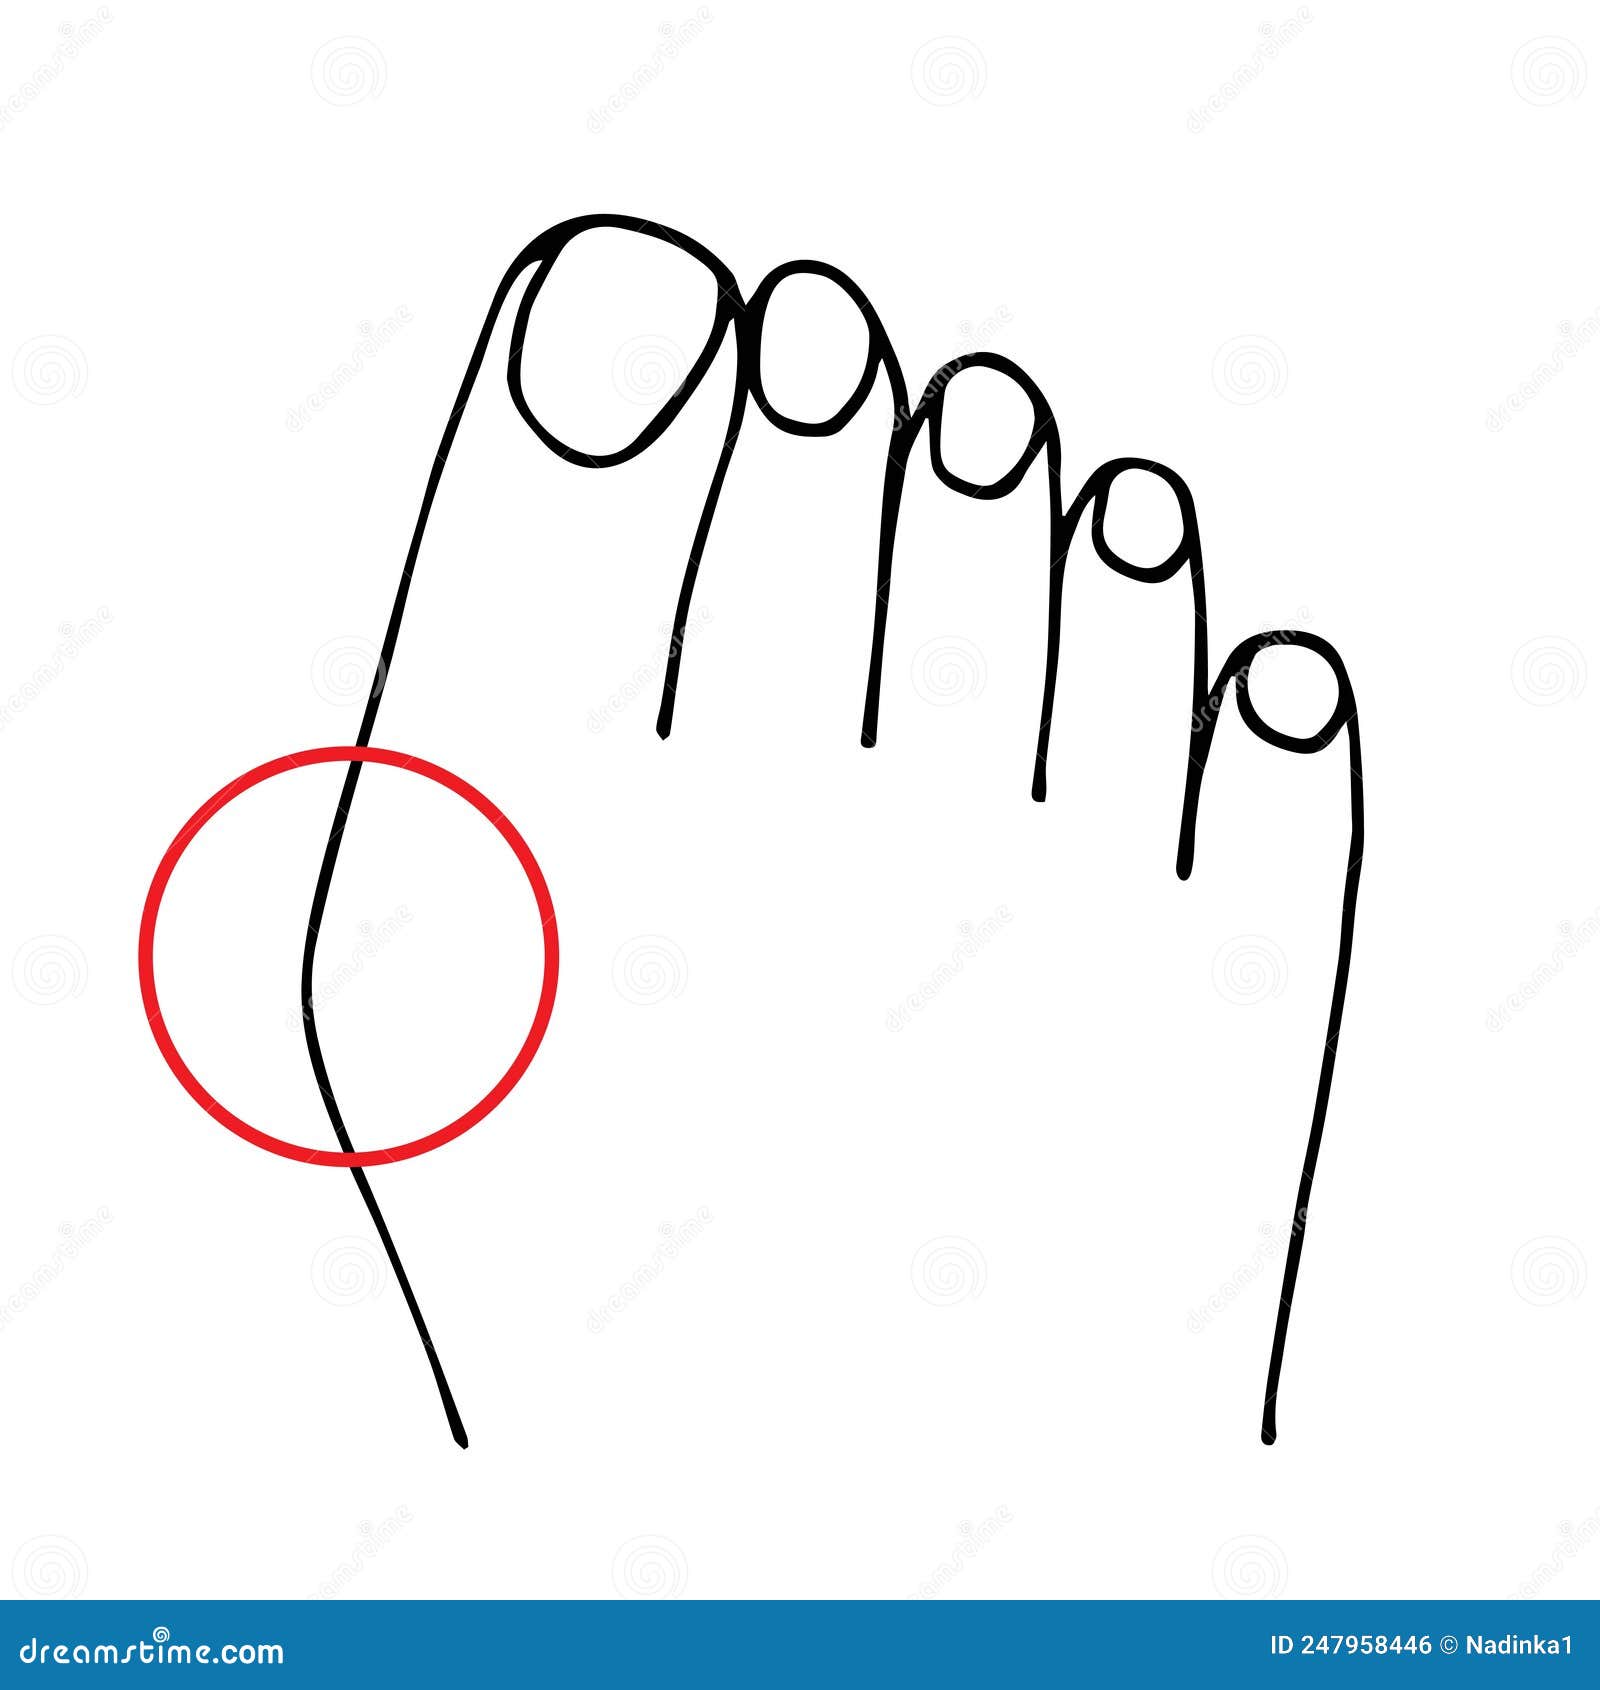  black outline drawing. hallux valgus, deformity of the big toe, curvature of the plus phalangeal joint. medicine and